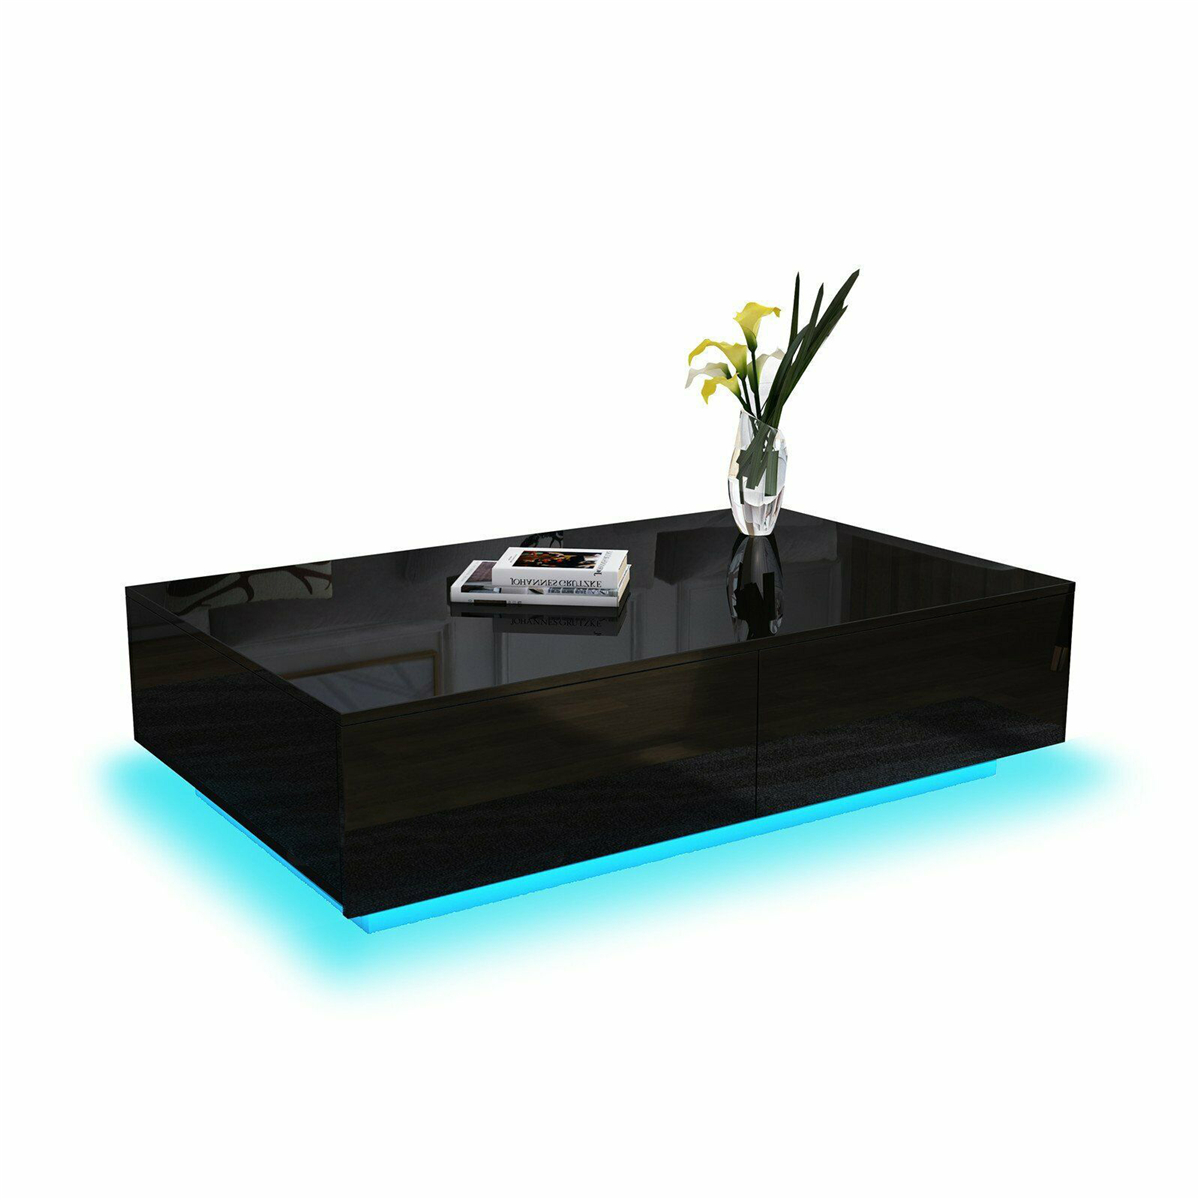 Hommpa Rectangular LED Coffee Table with 4 Drawers High Gloss Black Finish Modern Living Room Furniture Sofa Side Cocktail Table 37.4 x 23.6 x 15.4 inches - image 4 of 11